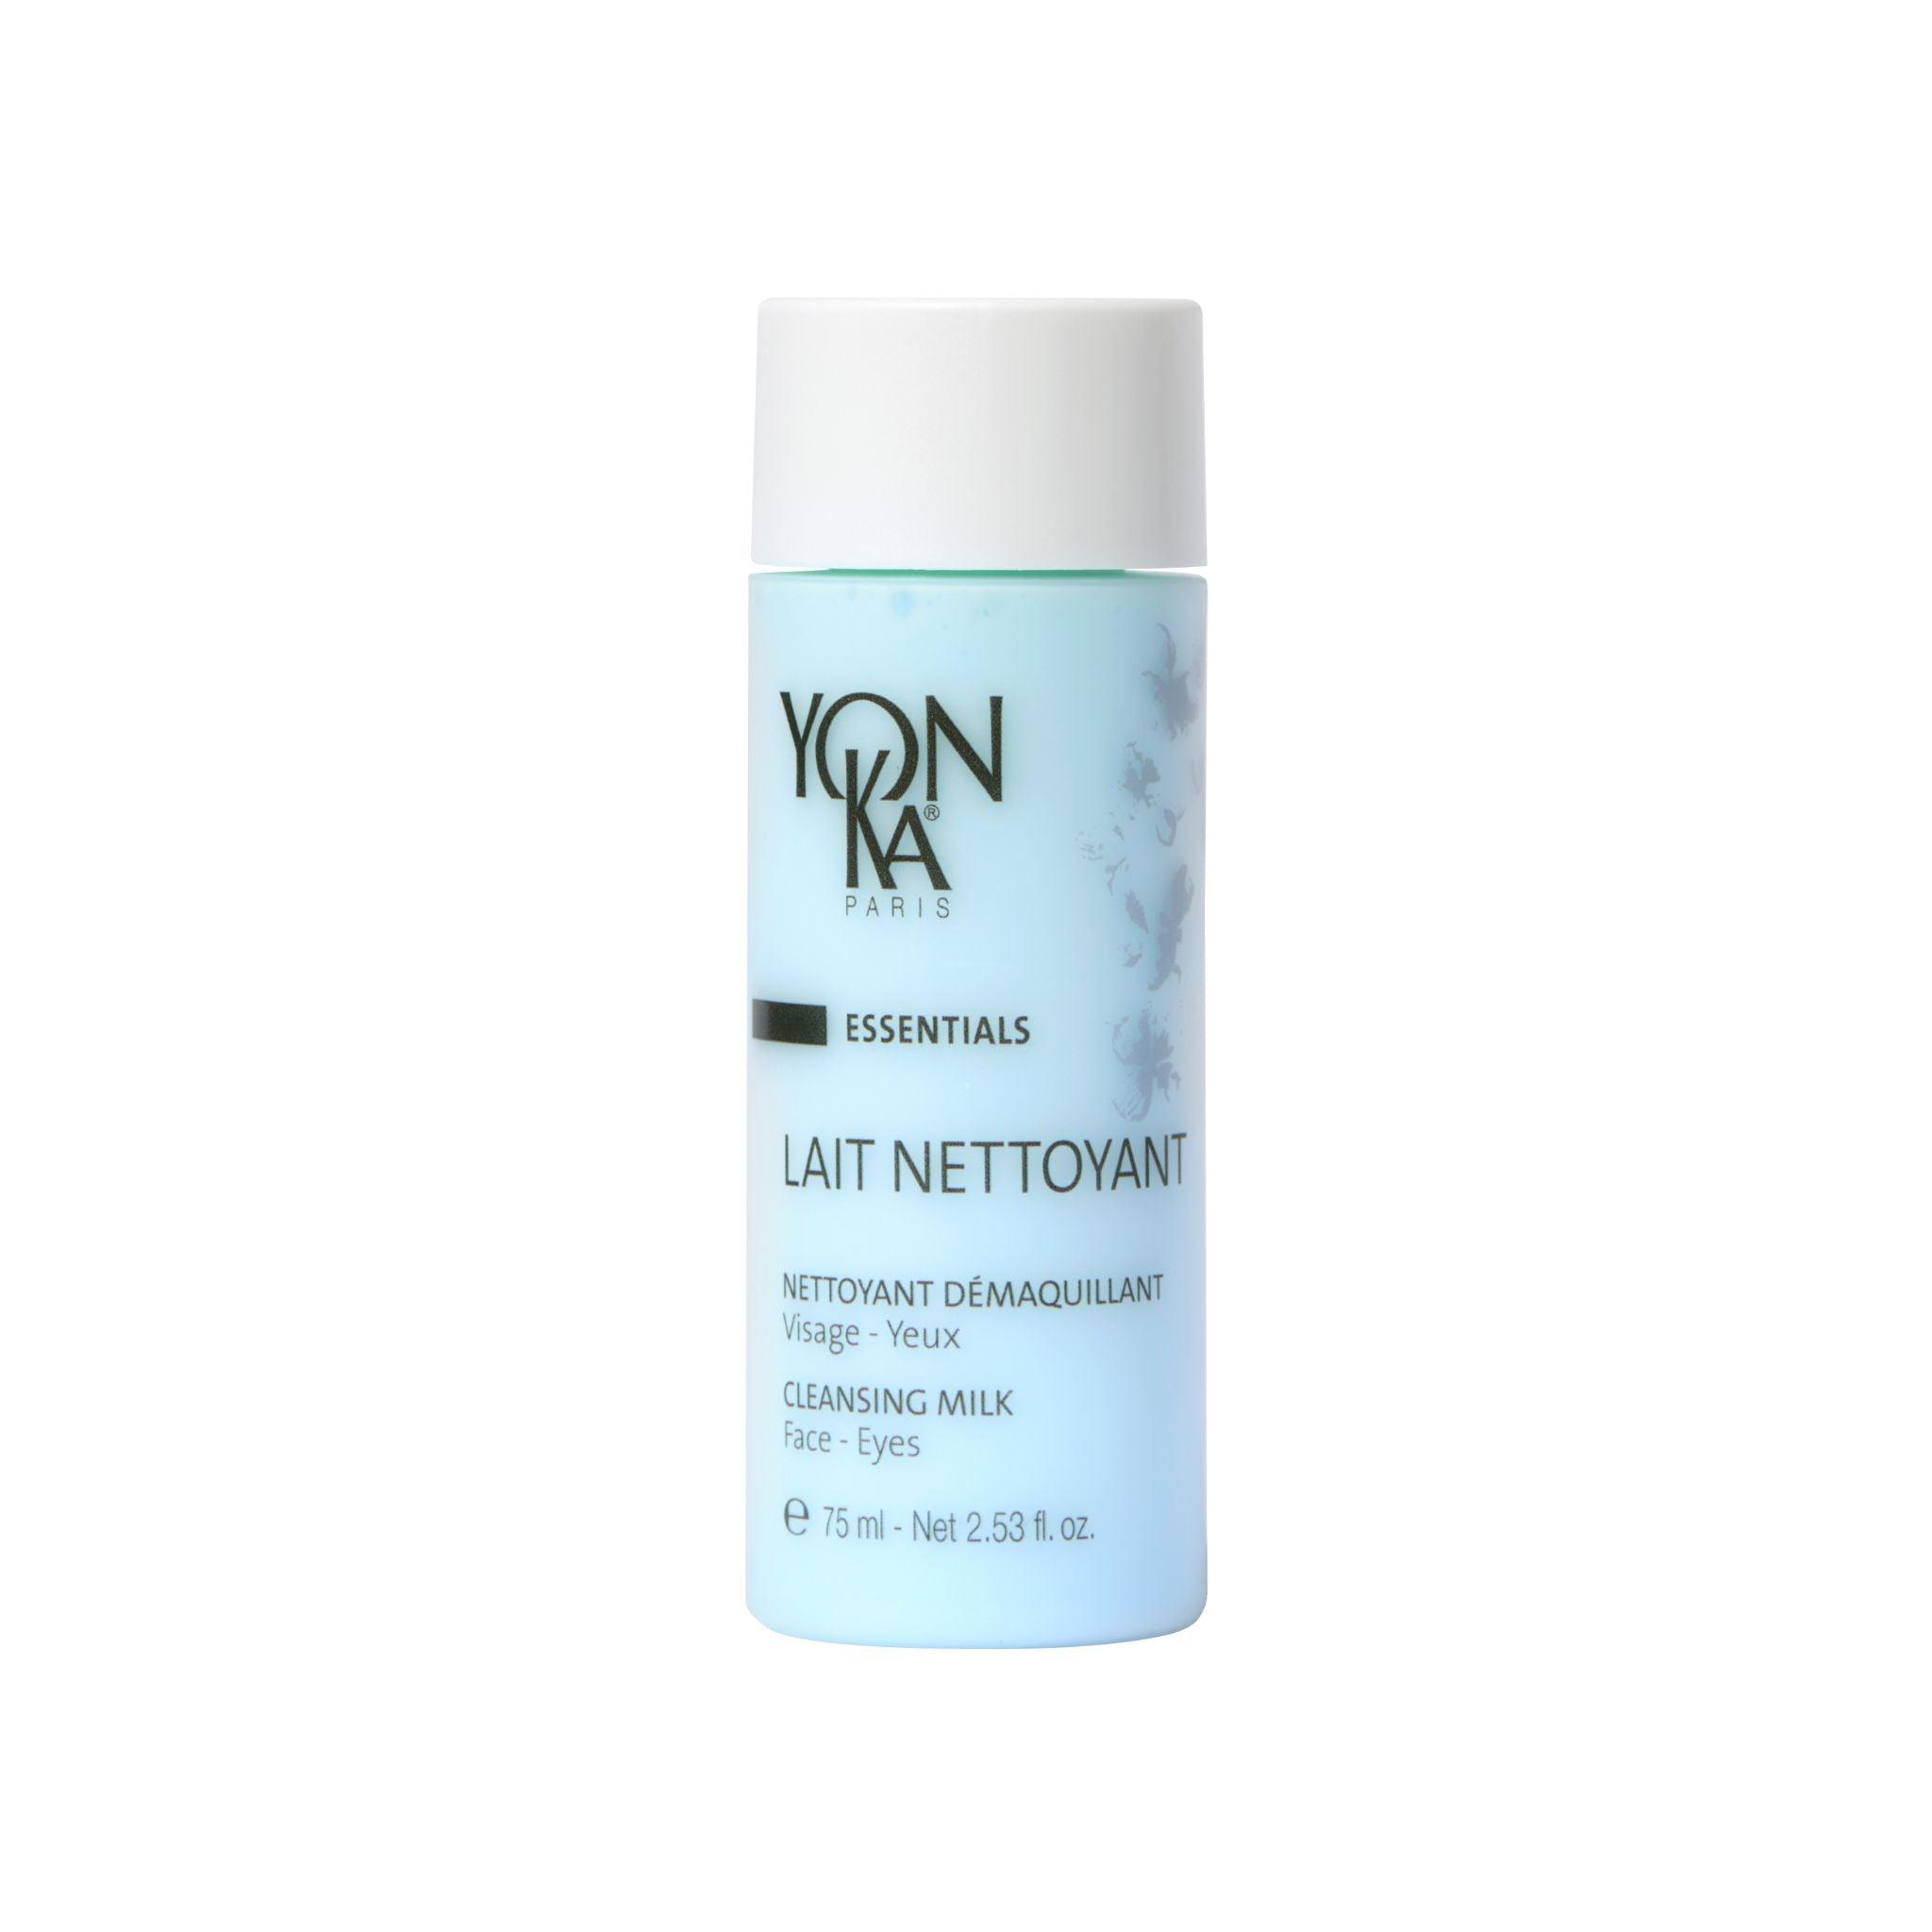 YonKa Lait Nettoyant (Cleansing Milk) - Travel Size - The Beauty House Shop